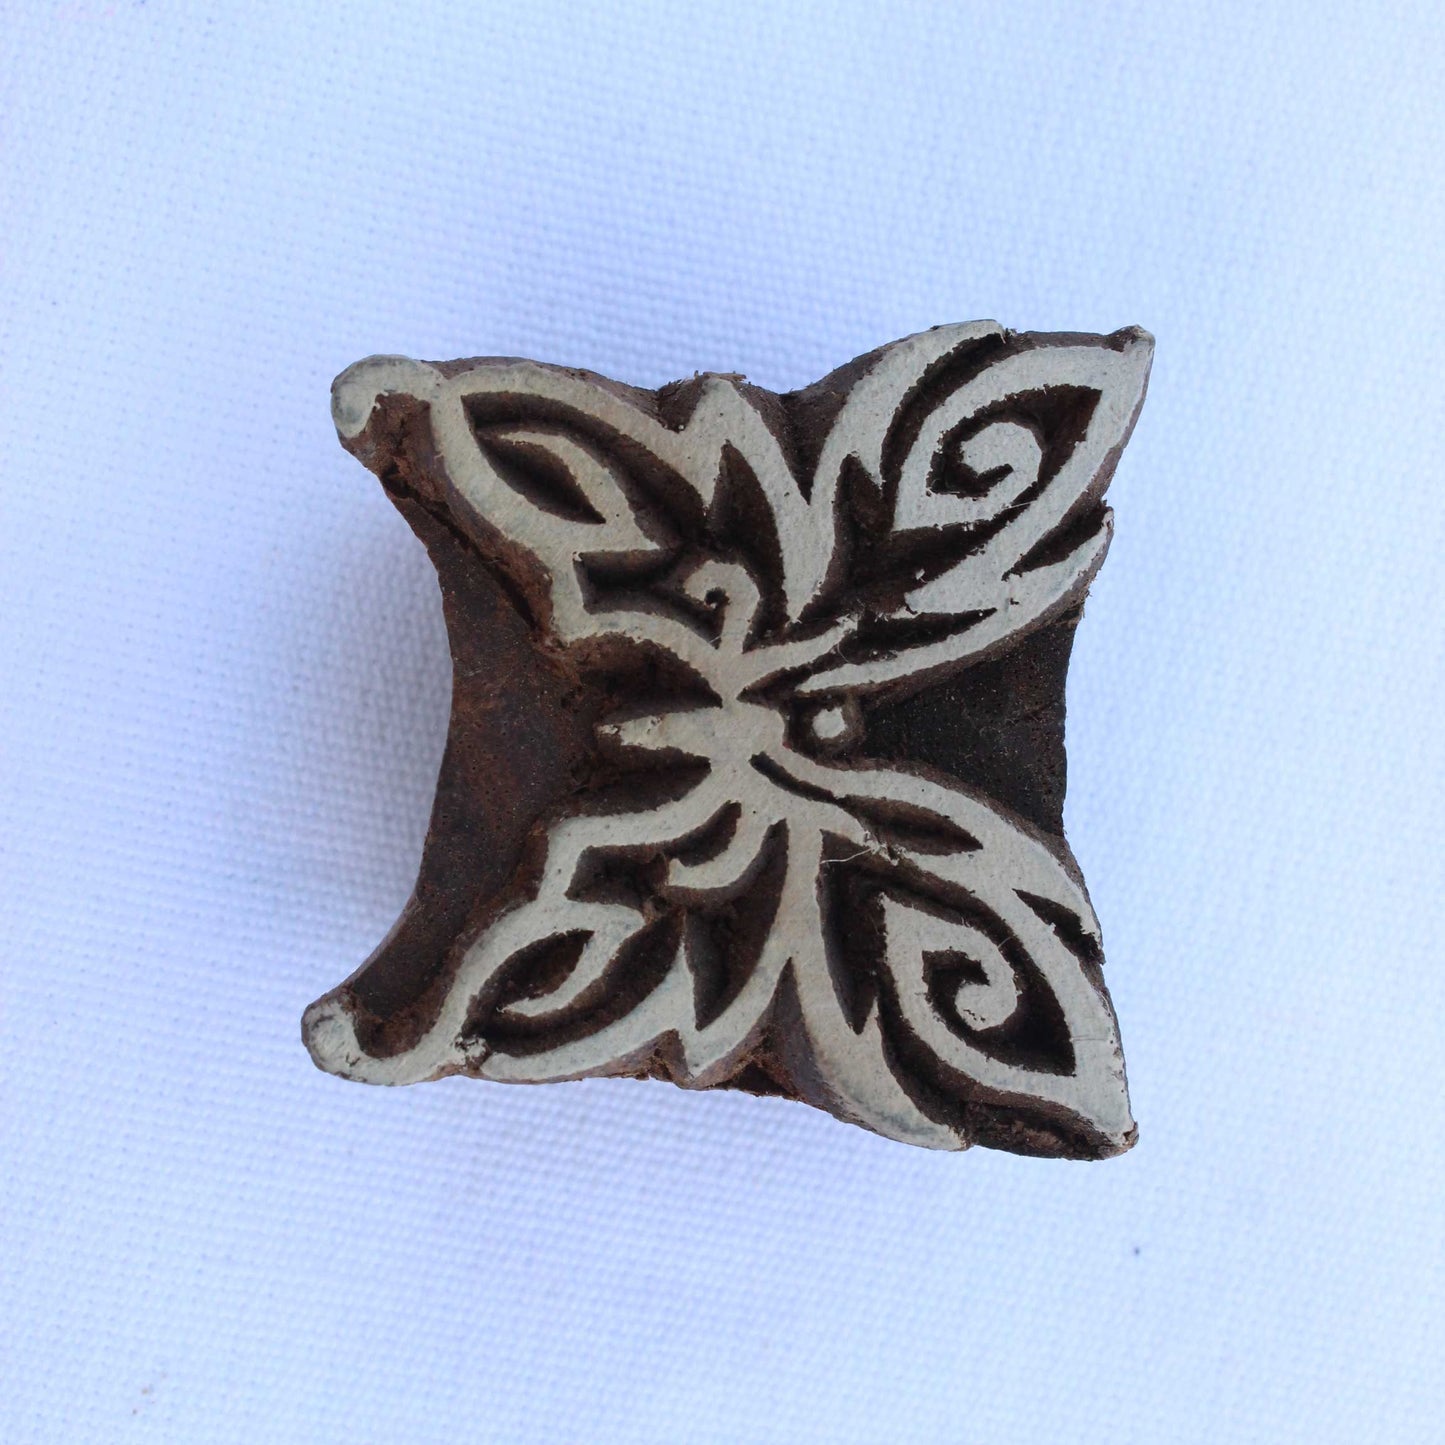 Butterfly Fabric Block Print Stamp Carve Wooden Stamp Celtic Block Print Stamp Hand Carved Wood Block Stamp For Printing Kids Soap Stamp